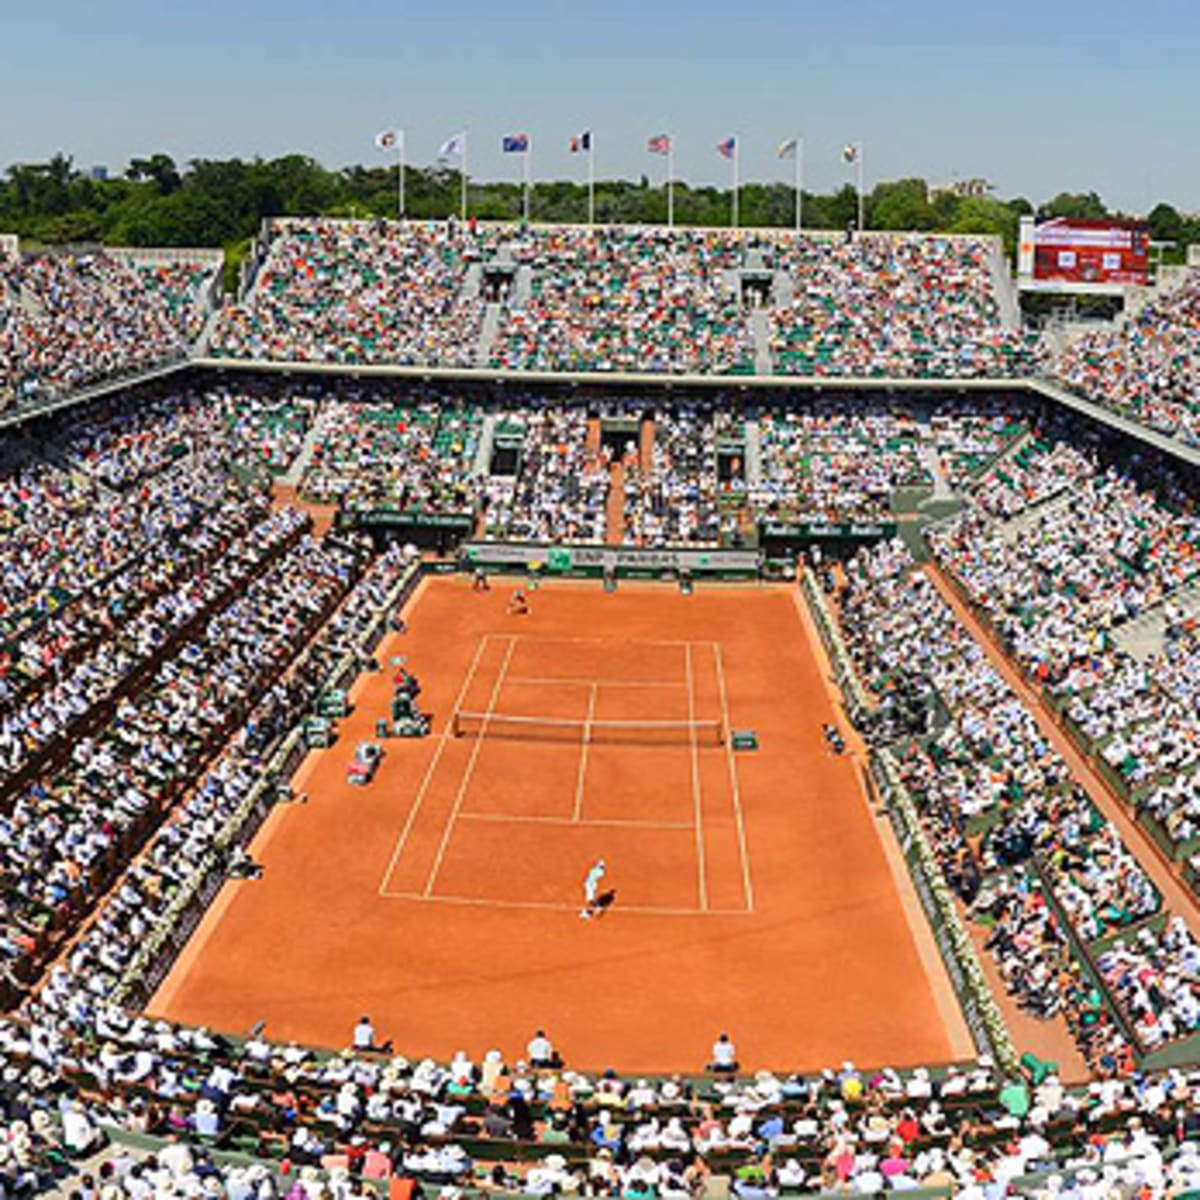 How Roland Garros Prepares And Maintains The Clay For The French Open Sports Illustrated